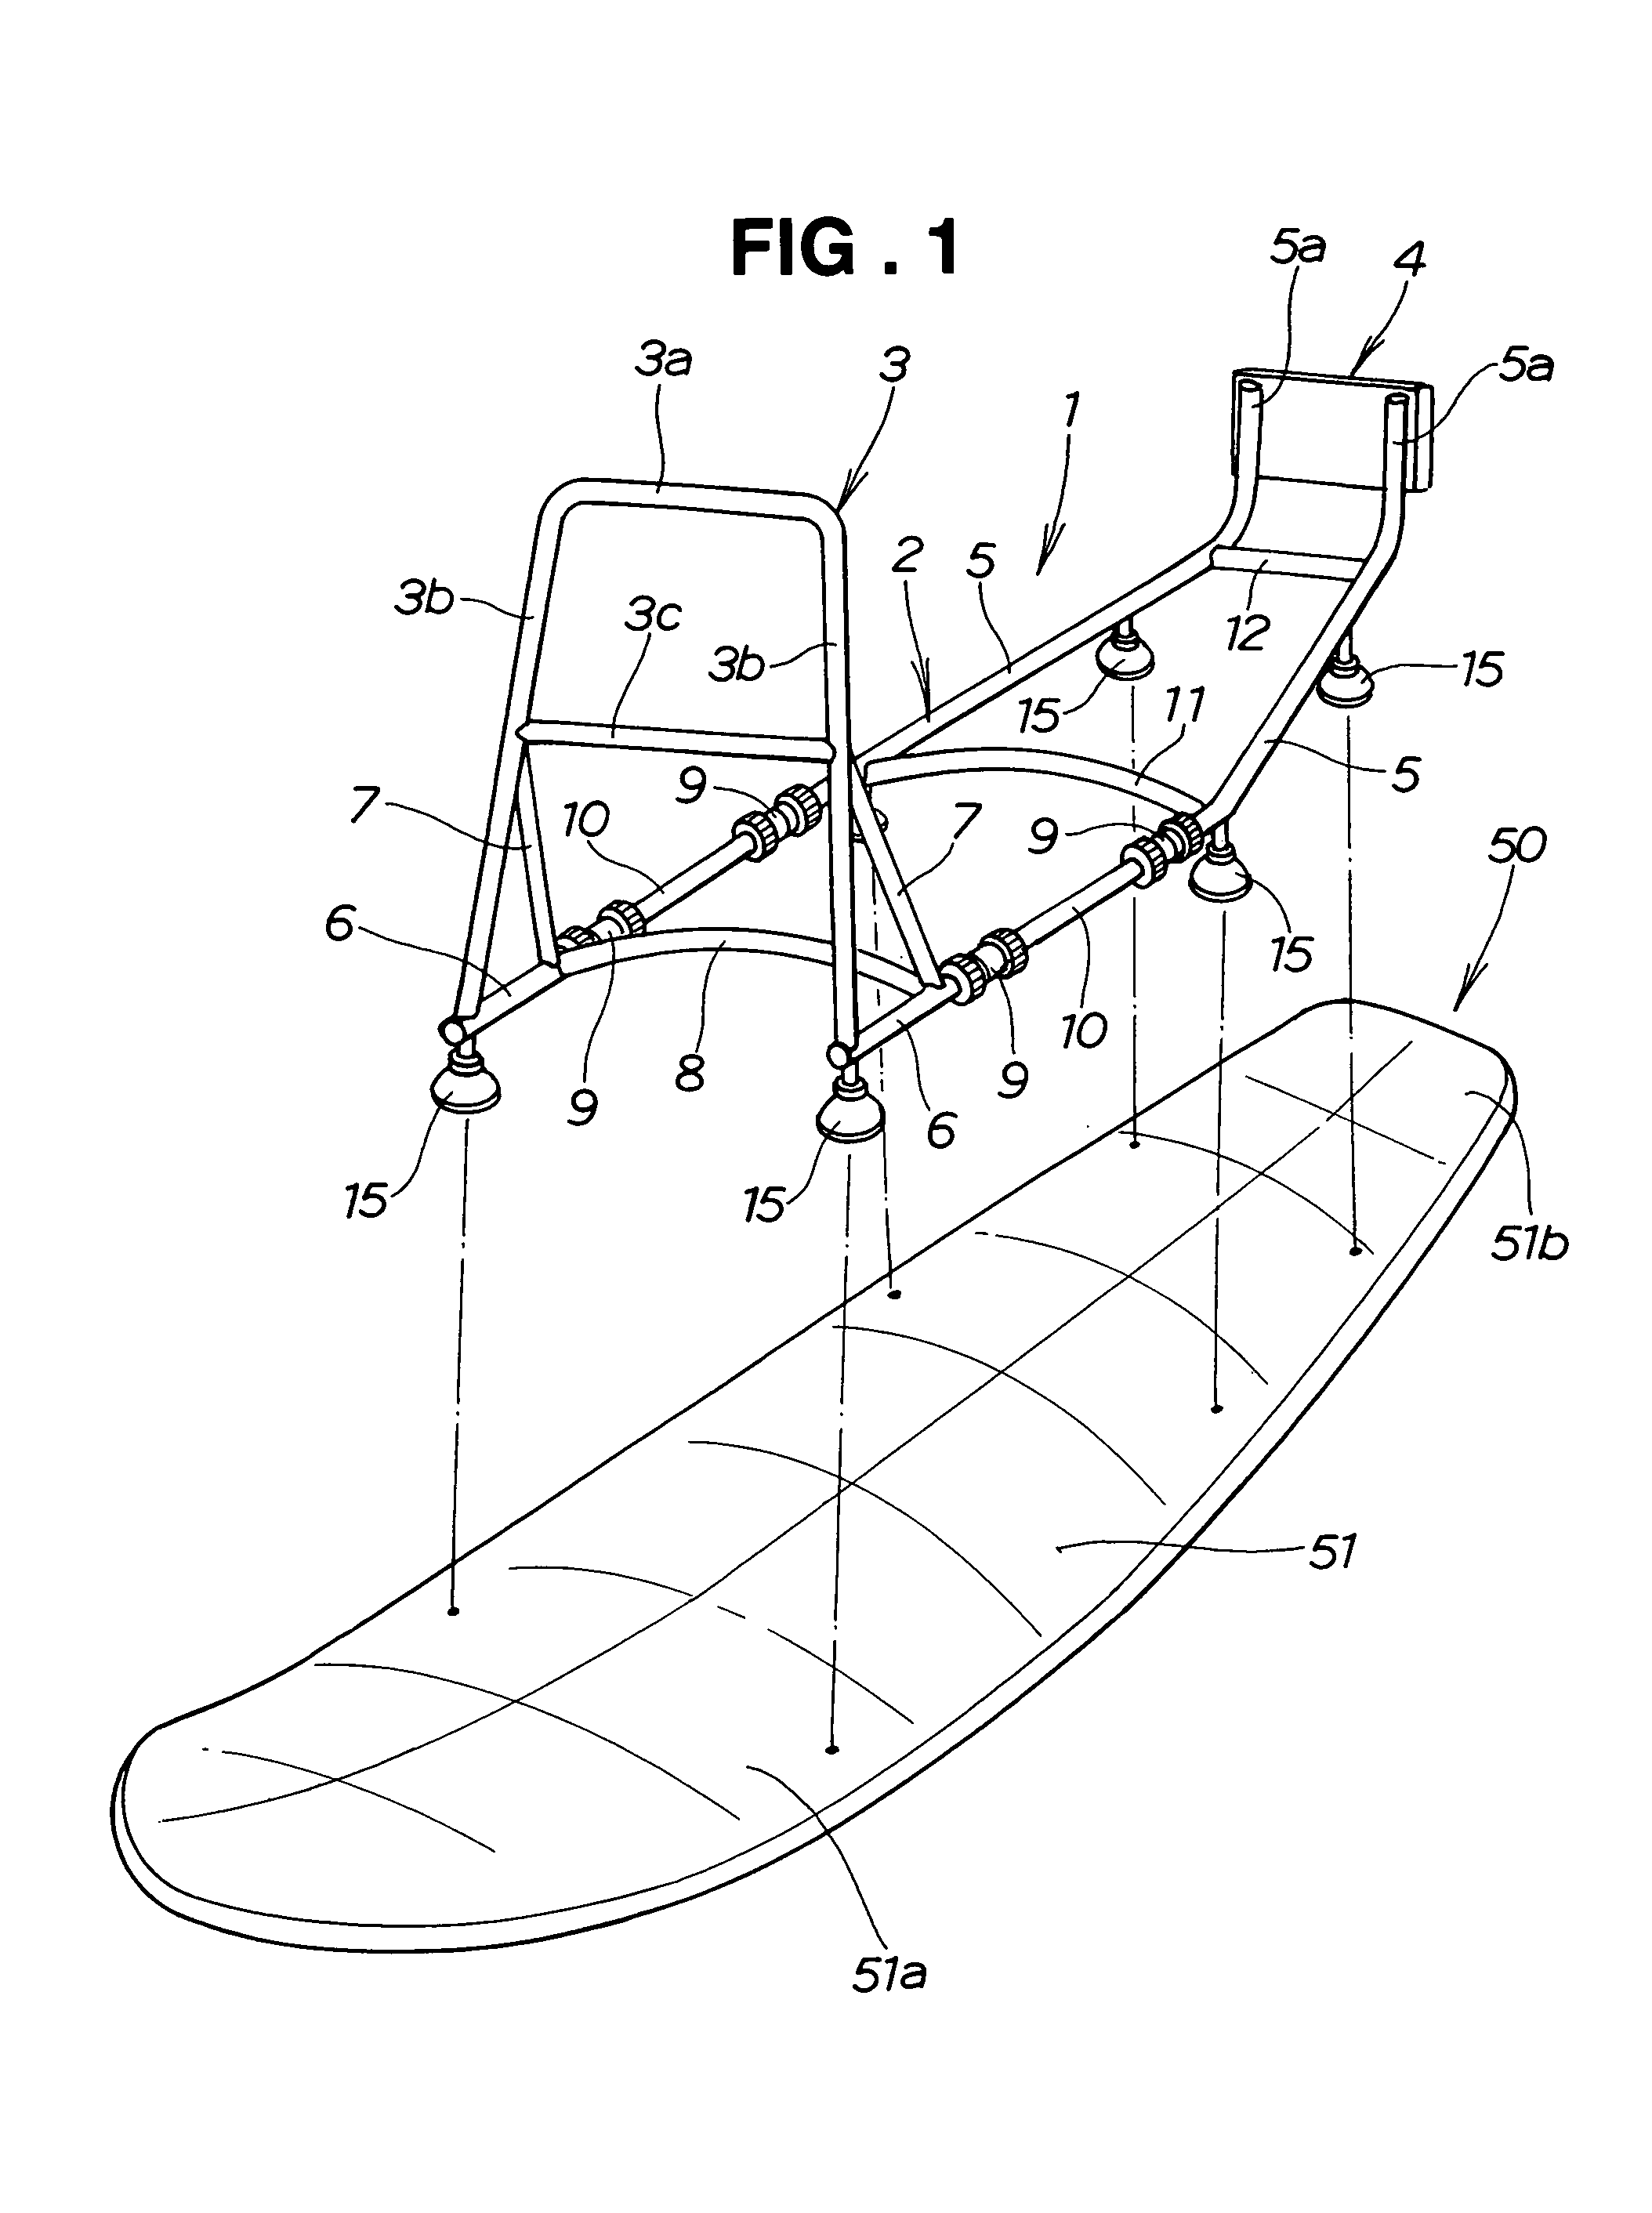 Marine propulsion attachment with removable frame structure for non-self-propelled marine vehicles